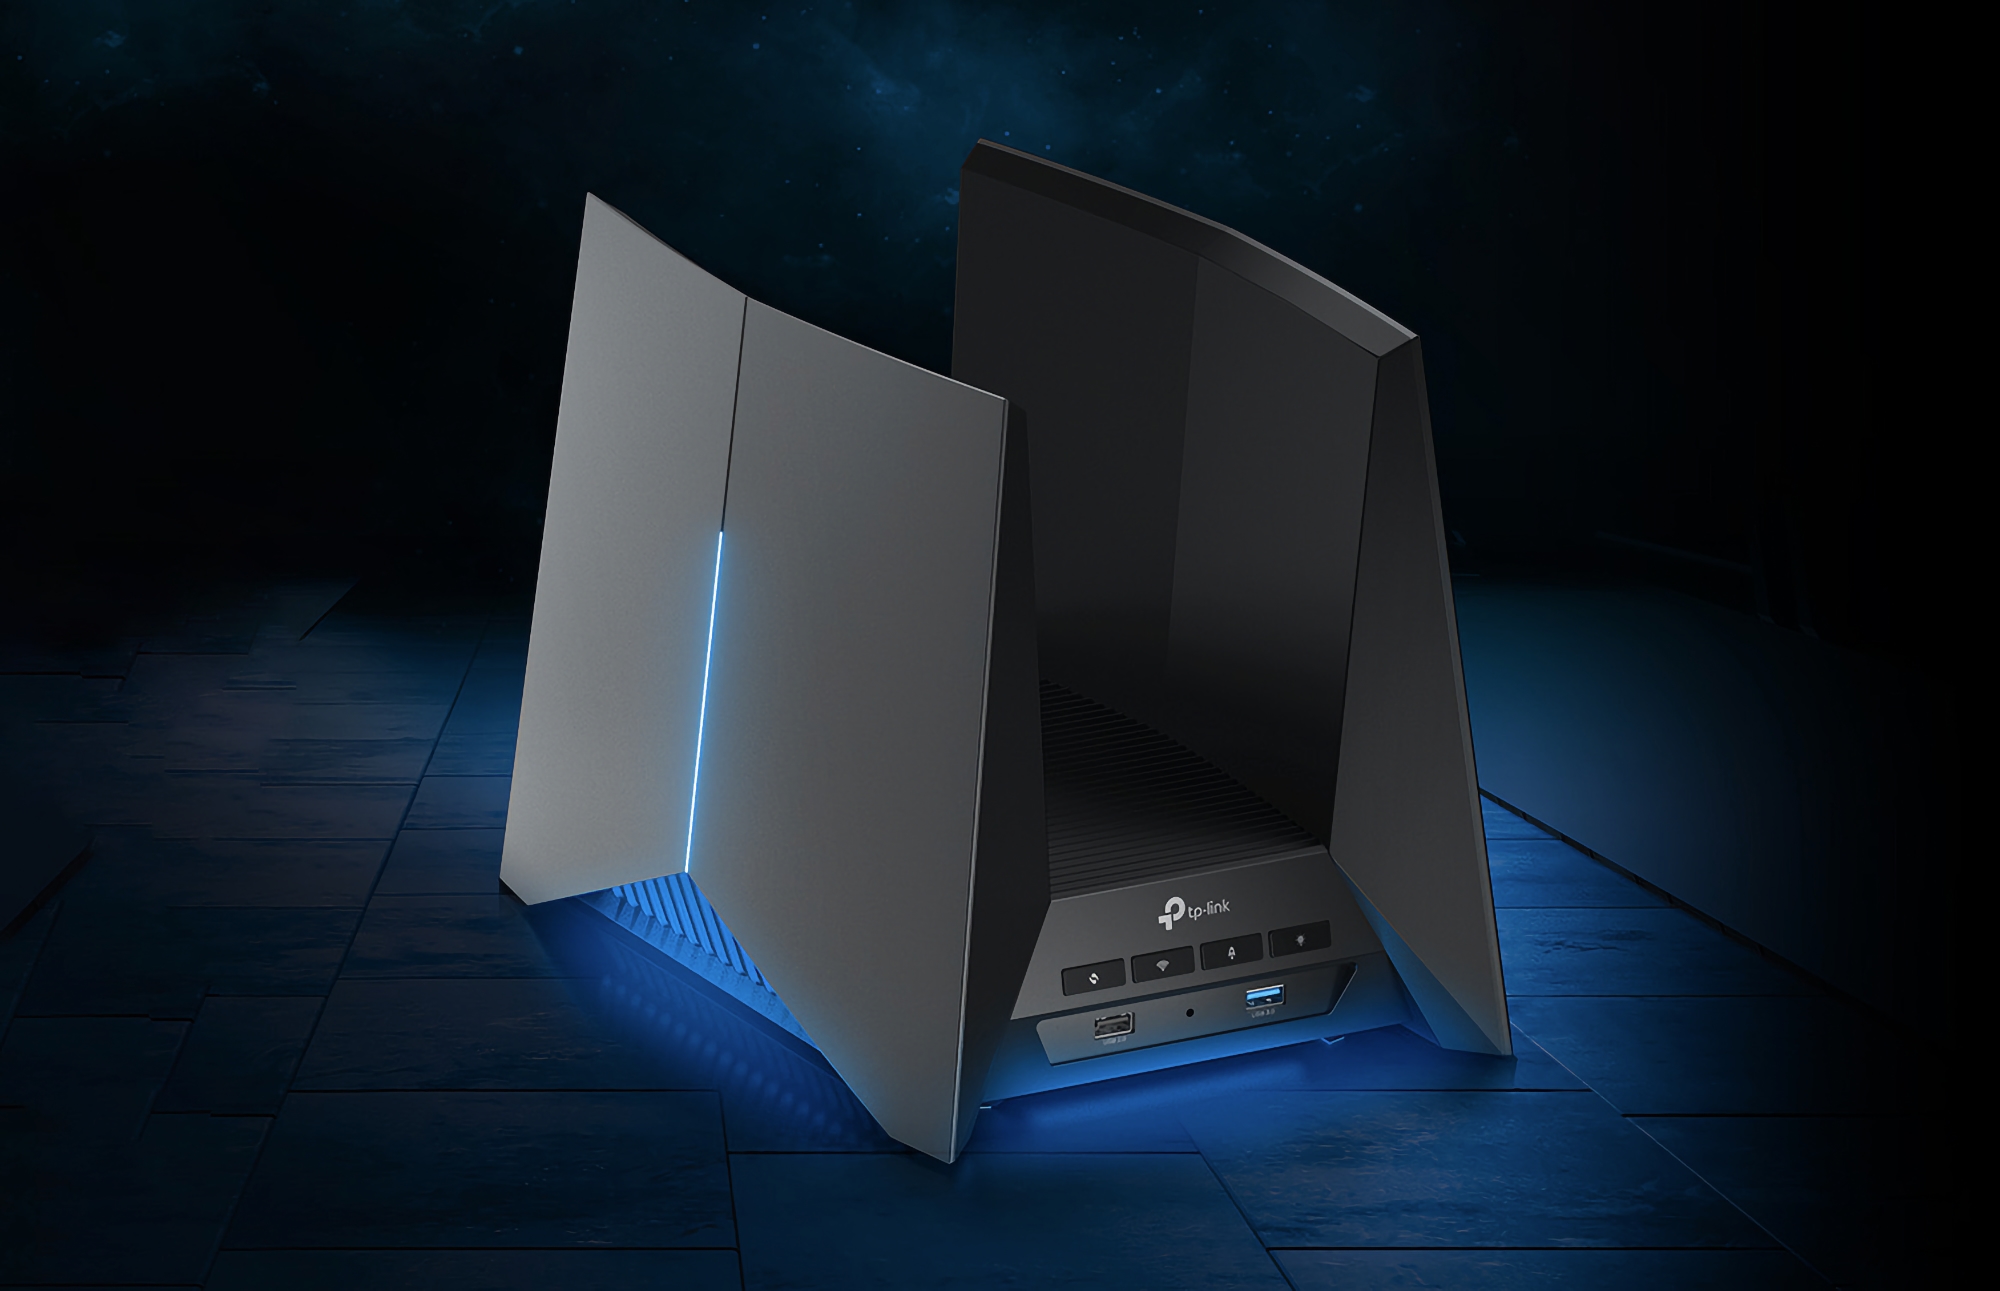 TP-Link introduced Archer GE800: a gaming router with Wi-Fi 7 support and Kylo Ren's Star Wars Command Shuttle design